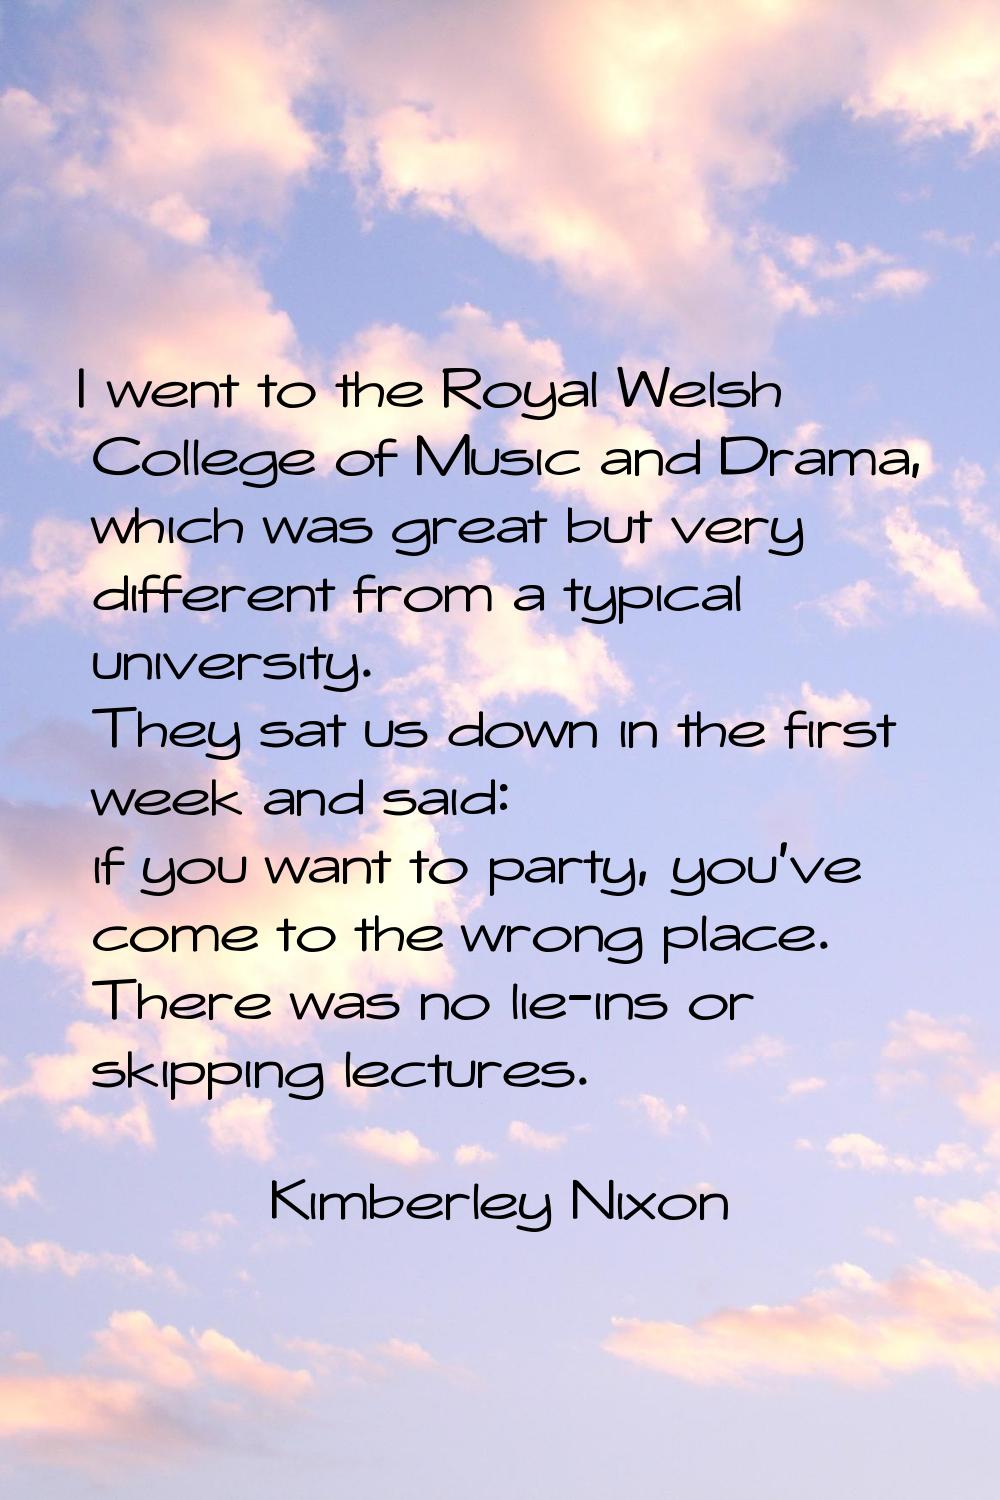 I went to the Royal Welsh College of Music and Drama, which was great but very different from a typ